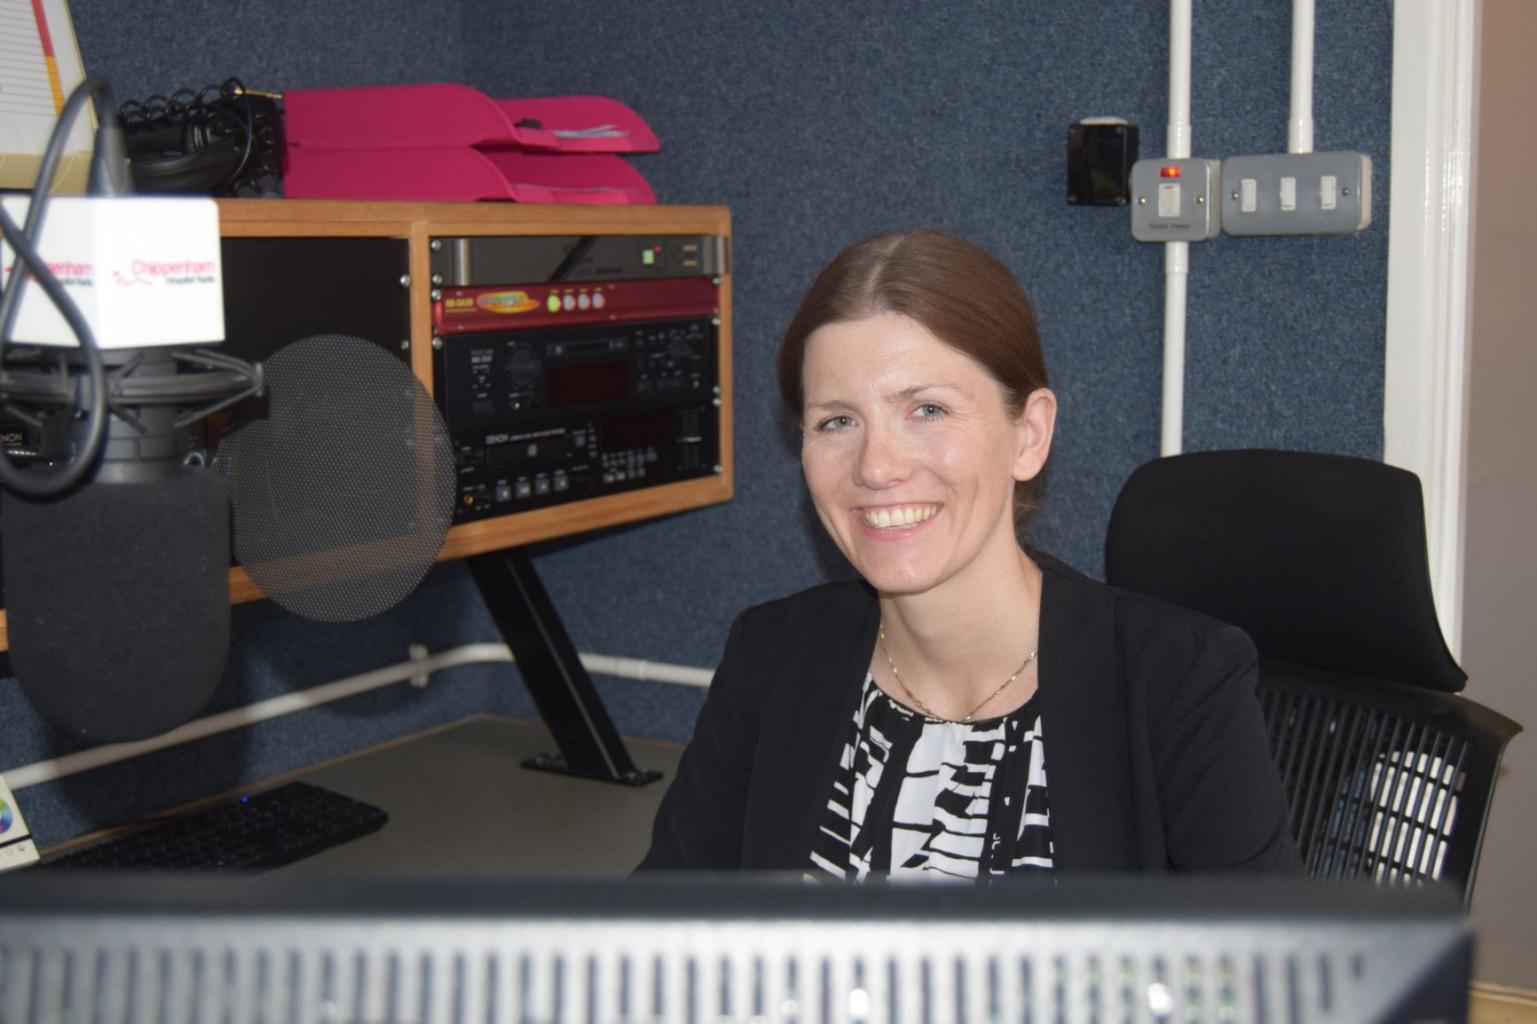 Our local MP Michelle Donelan visits for a look at our studio and to meet our volunteers